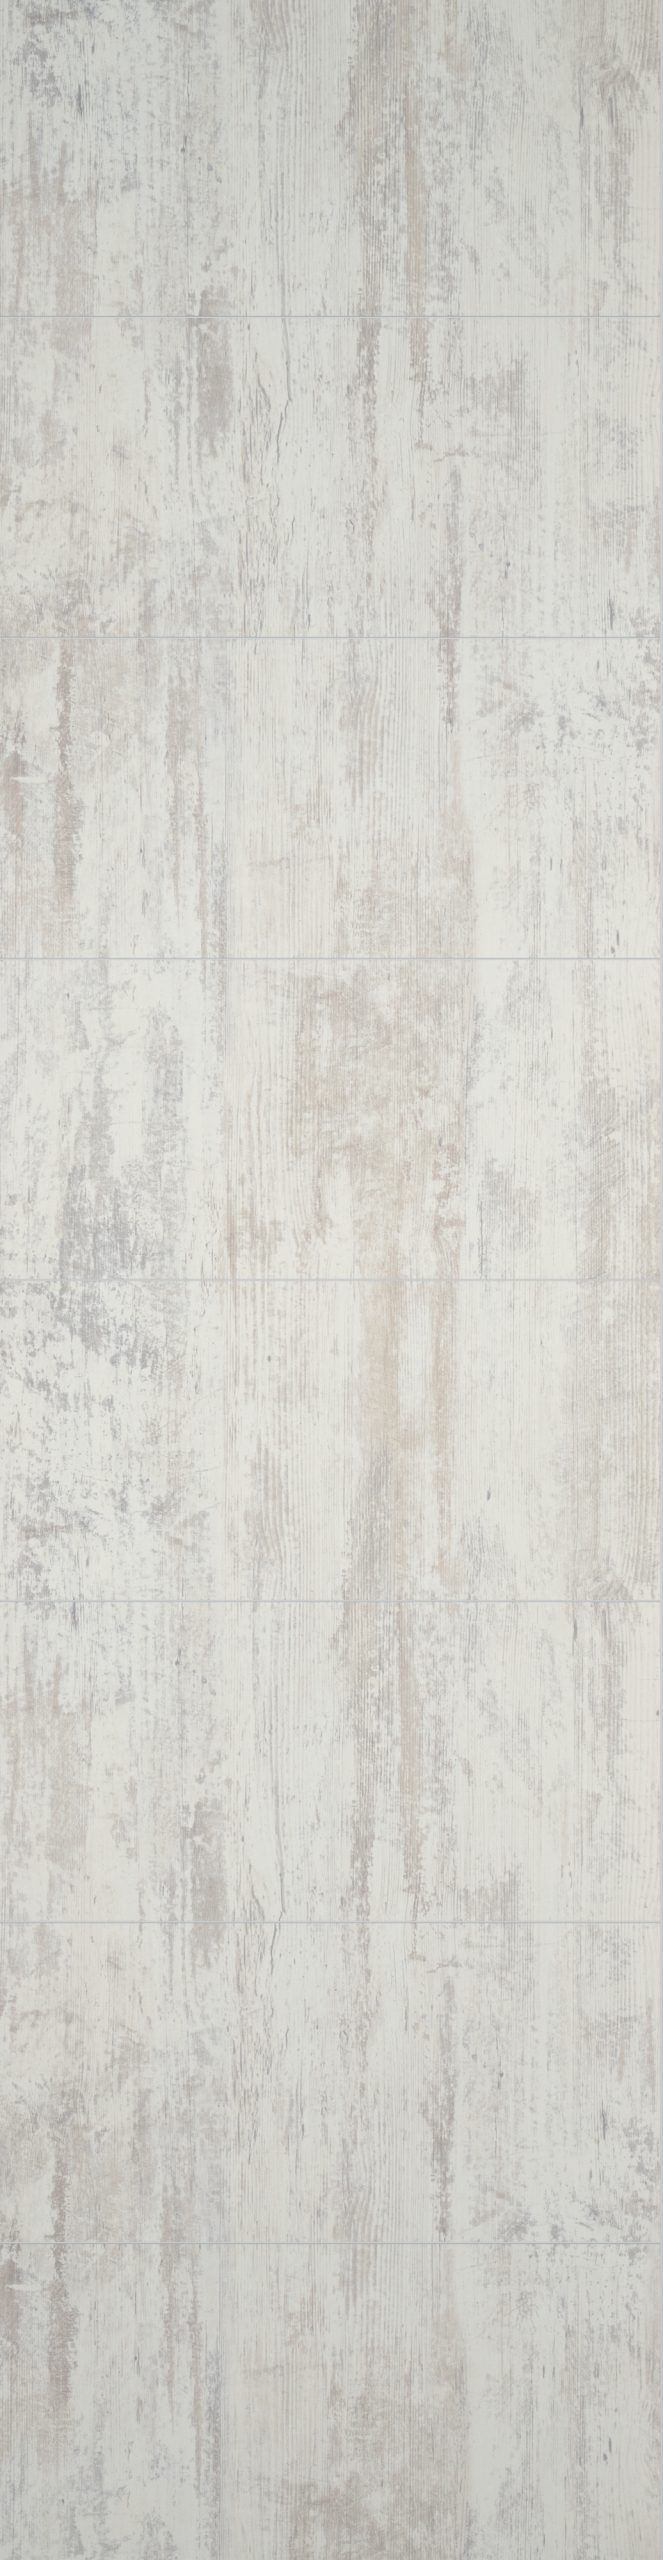 Antique grey 24 x 12 laminate shower wall panels - Innovate Building Solutions 